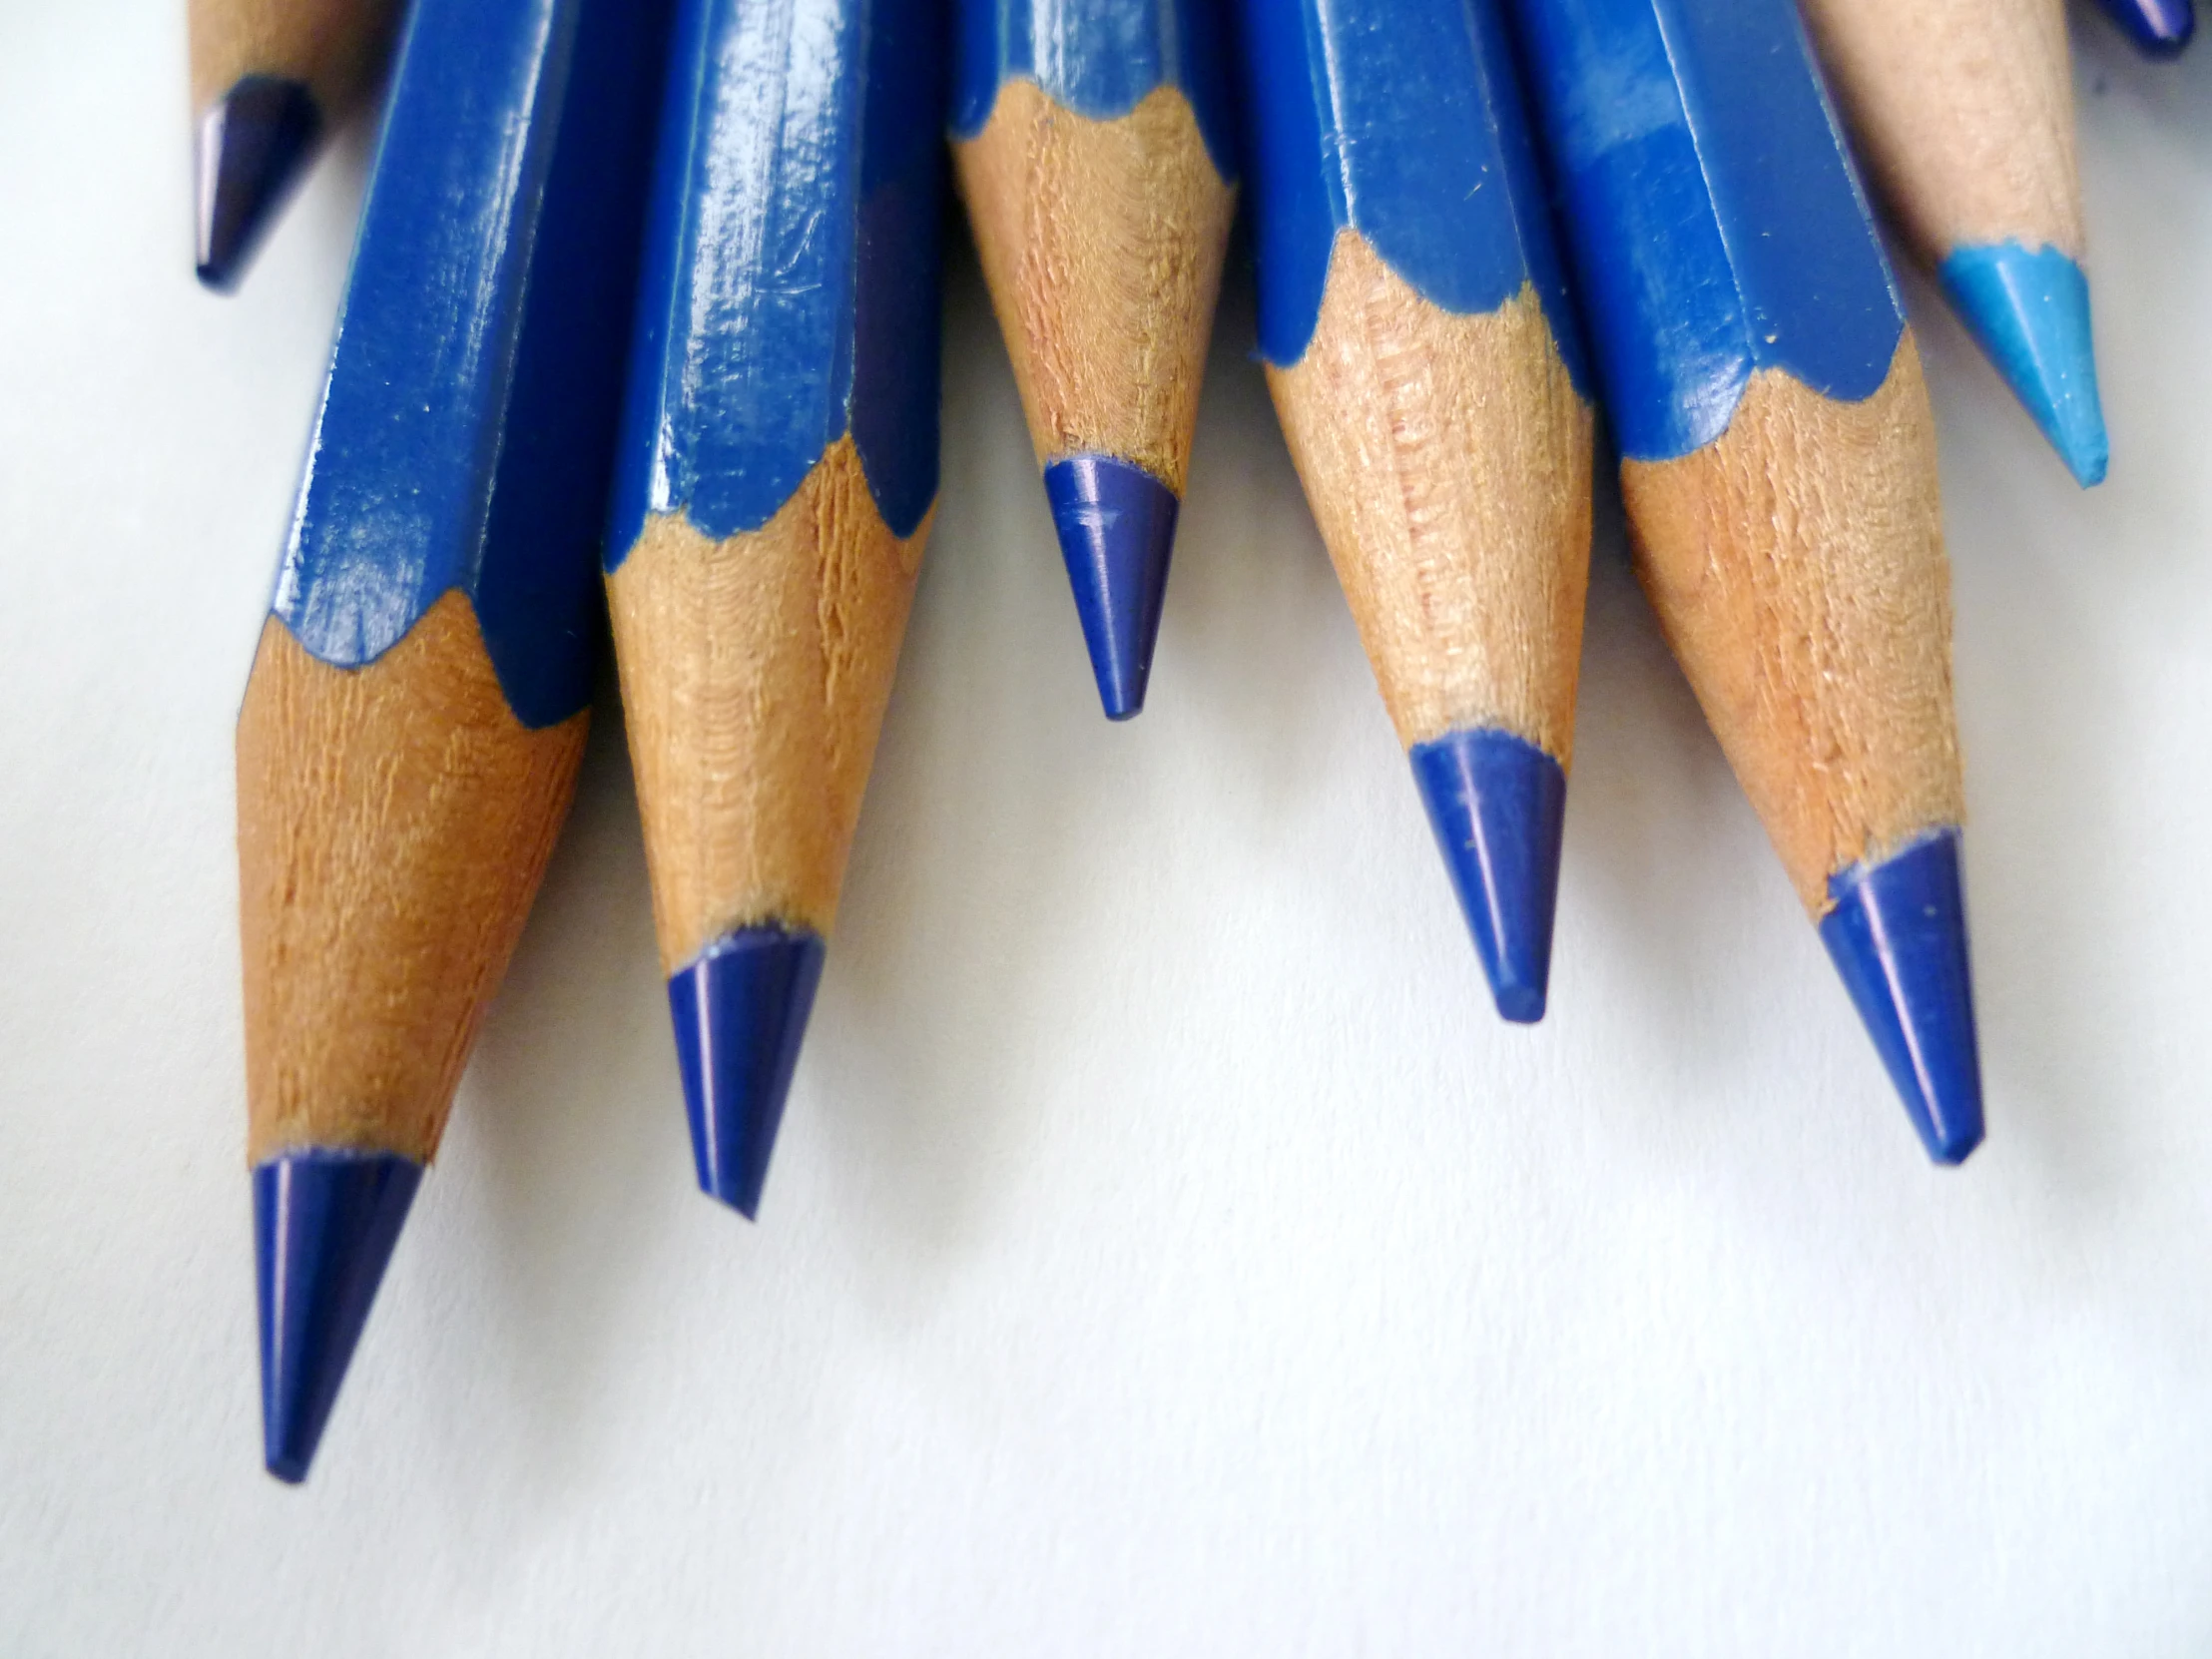 blue pencils with pointed ends on a white surface